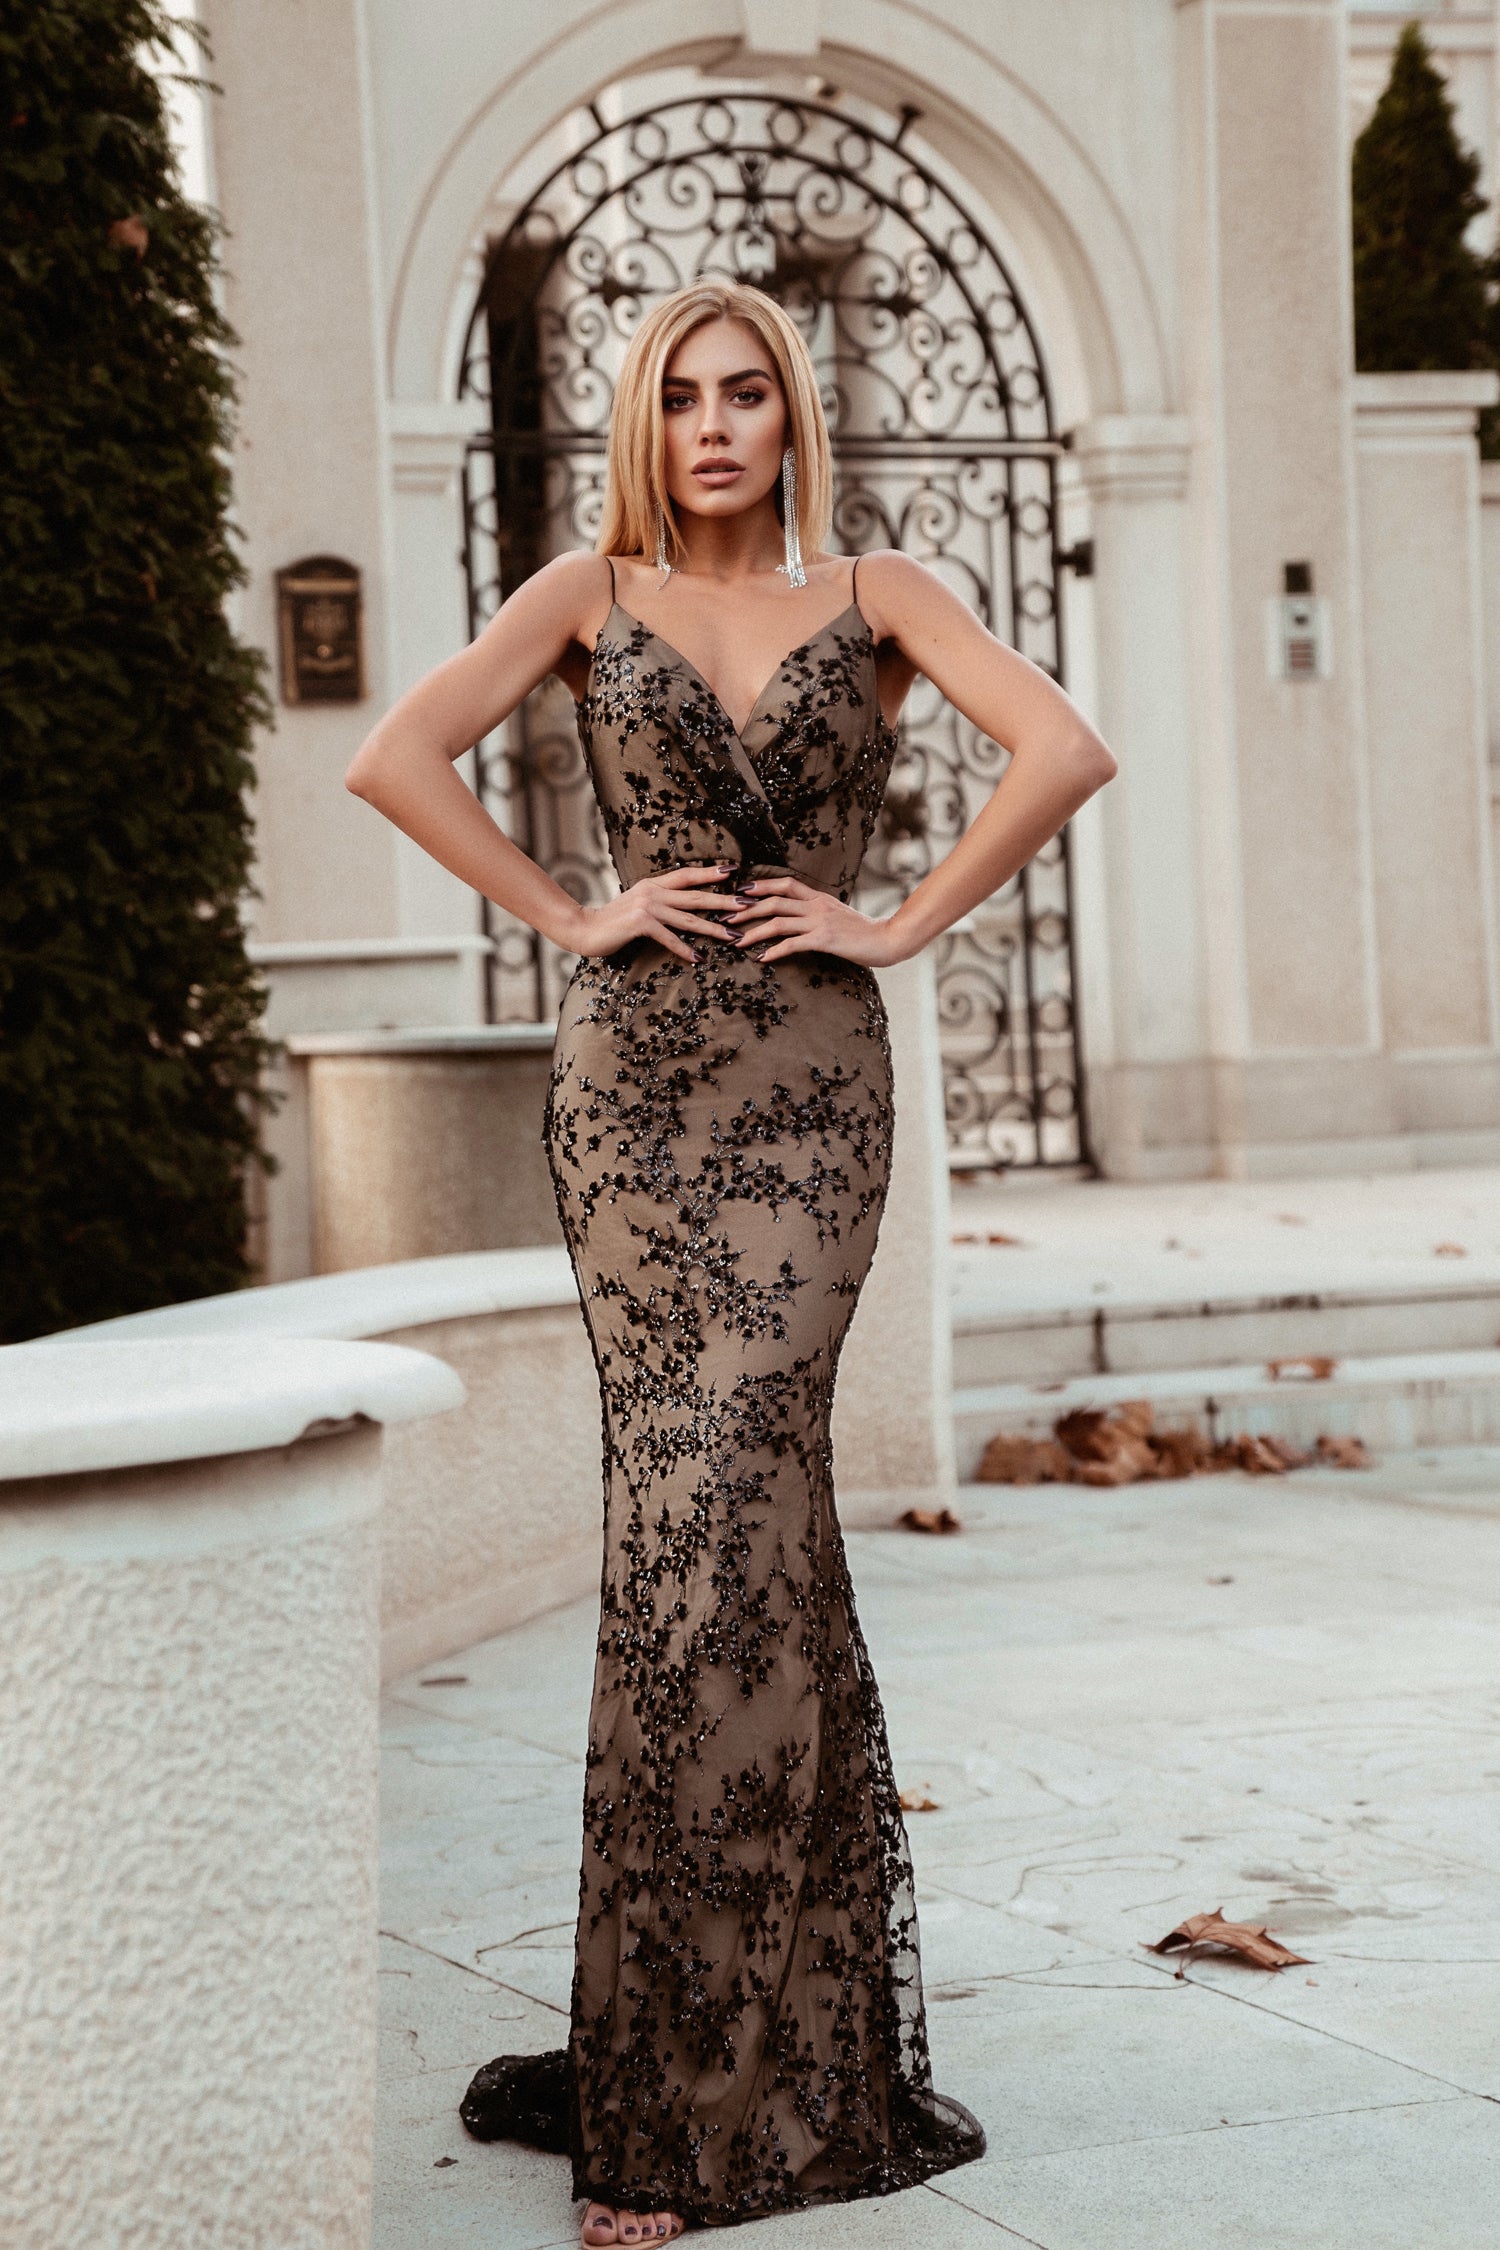 Tina Holly Couture Designer TW049 Black & Nude Beaded Sequin Mermaid Formal Gown